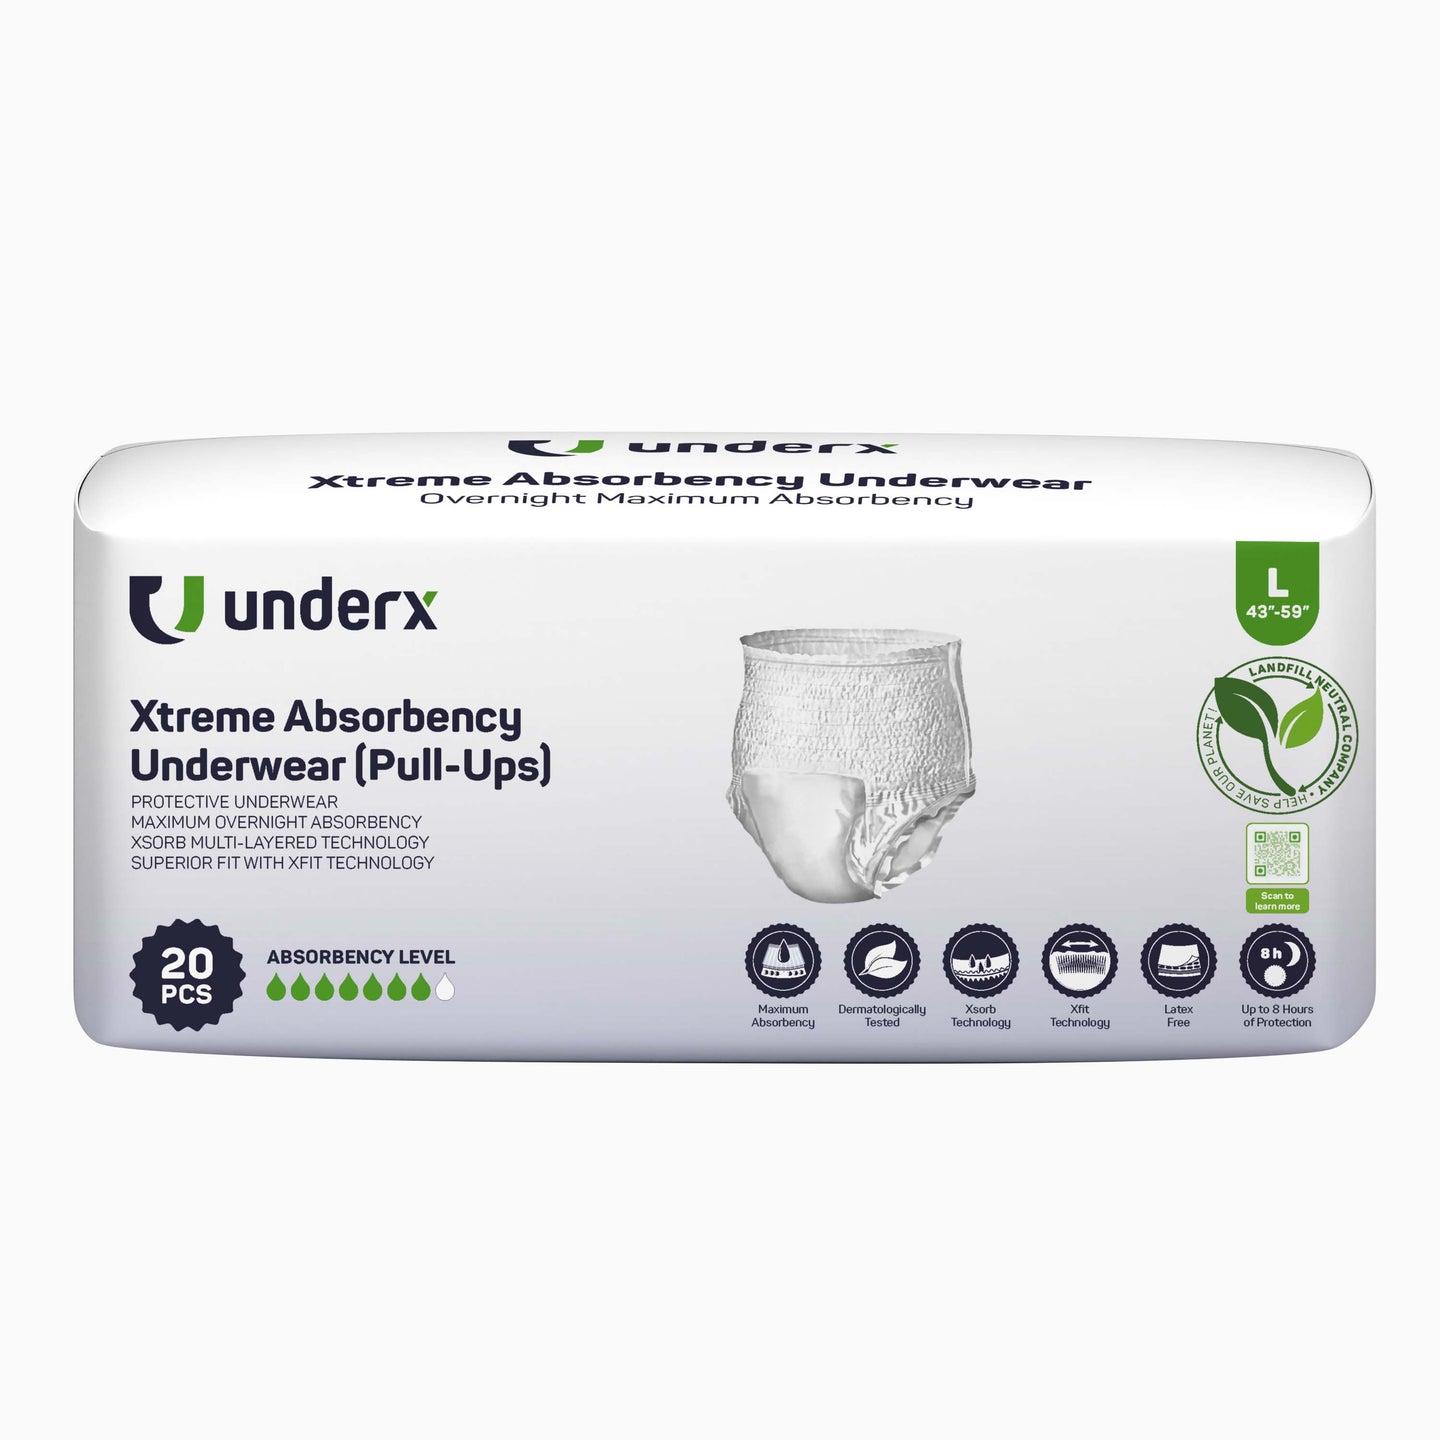 Subscription: Adult Diapers (Pull-Ups)